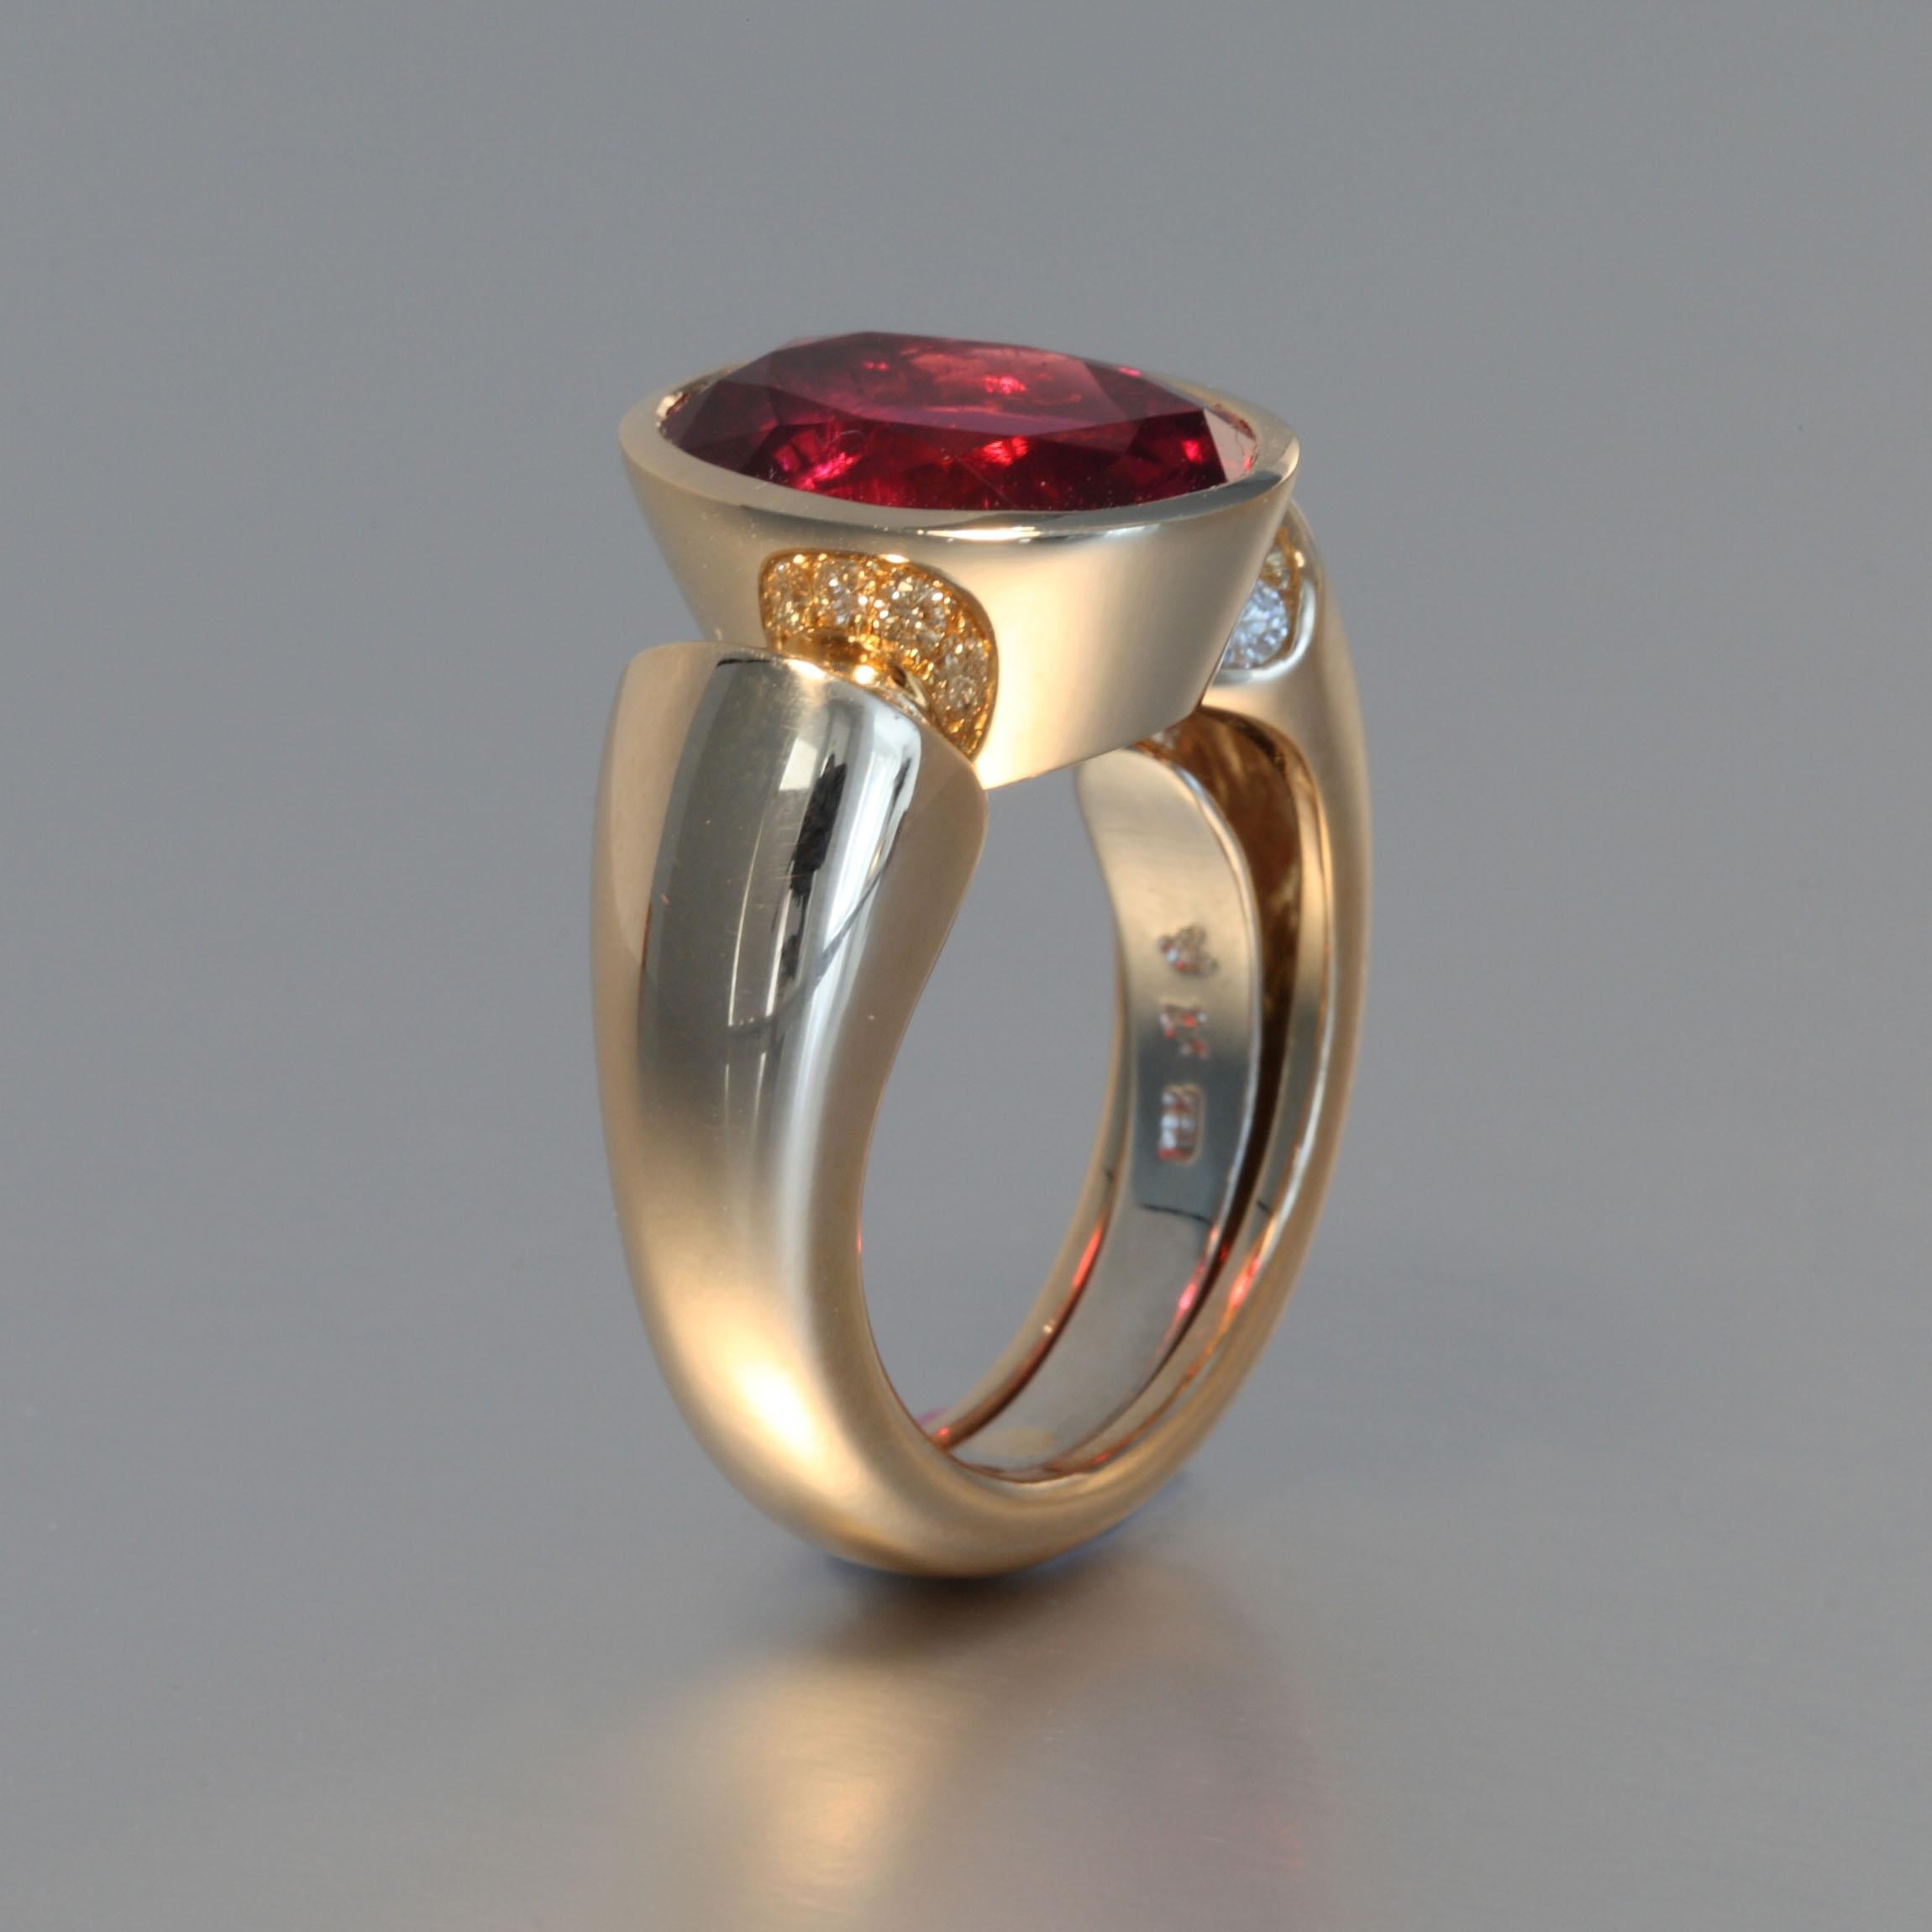 This vibrant oval Rubelite Tourmaline of 6.39 carats is set in a rose gold ring with 0.34 carats of diamonds F,G vvs. It is designed and hand made in Zurich, Switzerland by Robert Vogelsang and is a one of a kind piece signed RV.

It is set in 18K